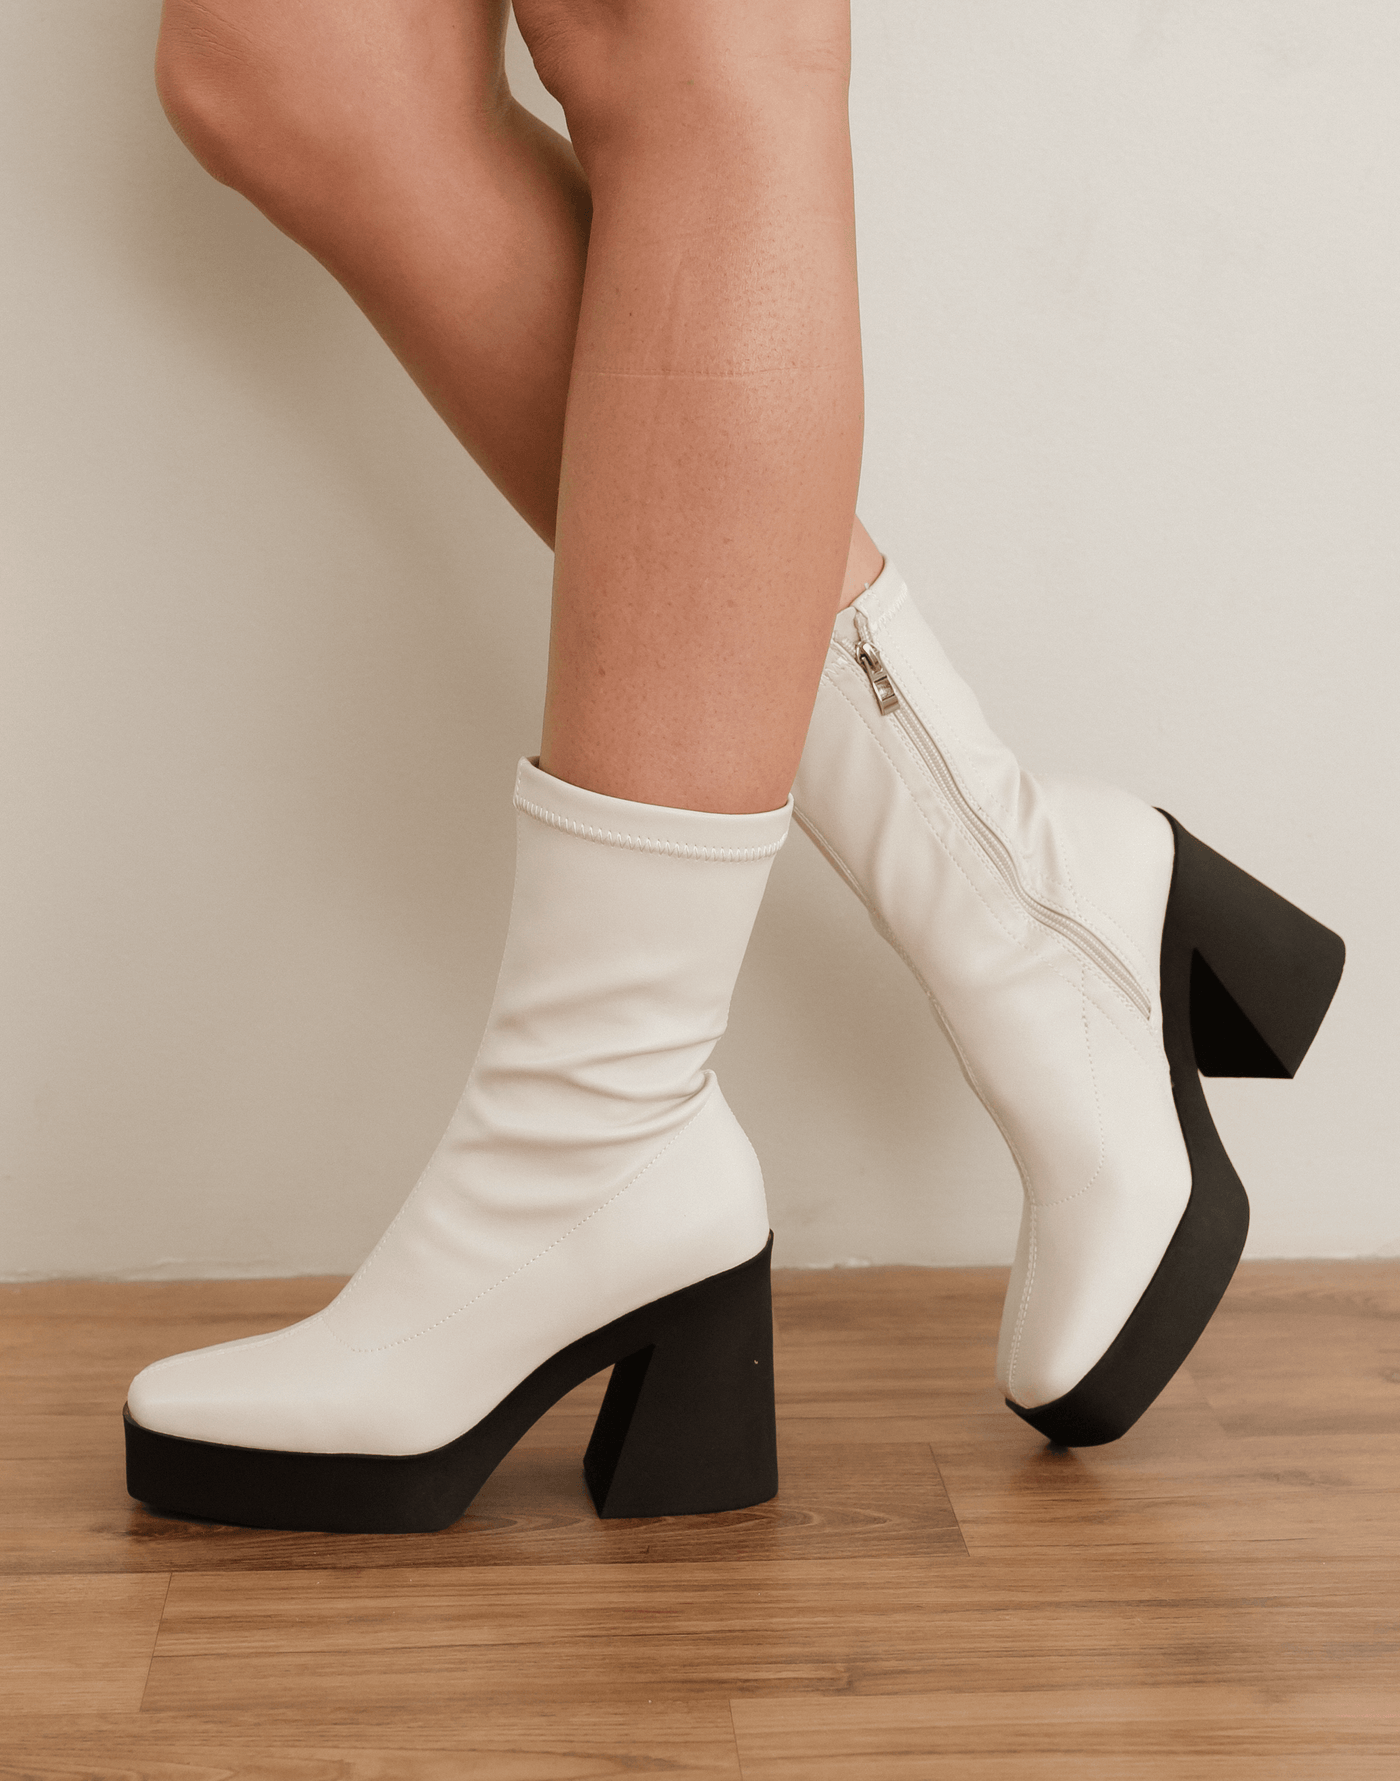 Jagger Boots (Bone) - By Therapy - Women's Shoes - Charcoal Clothing